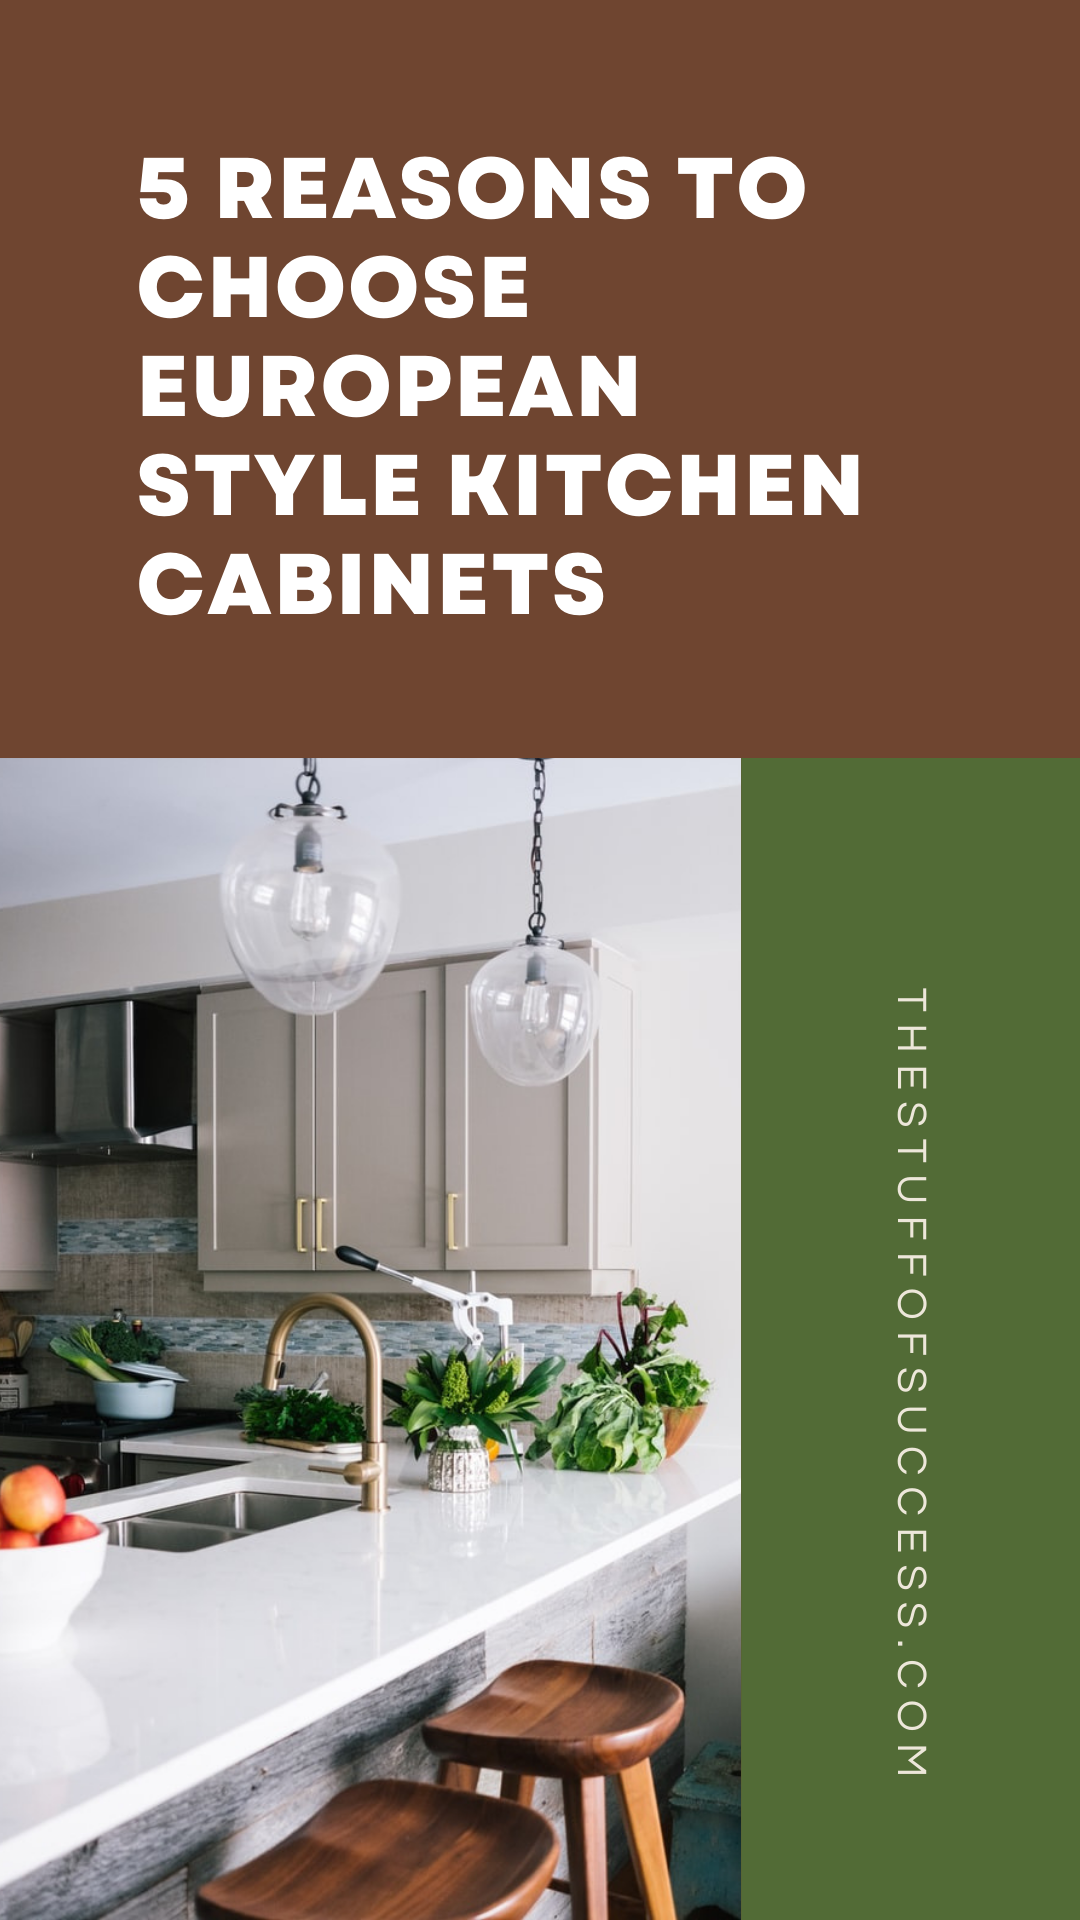 5 Reasons to Choose European Style Kitchen Cabinets